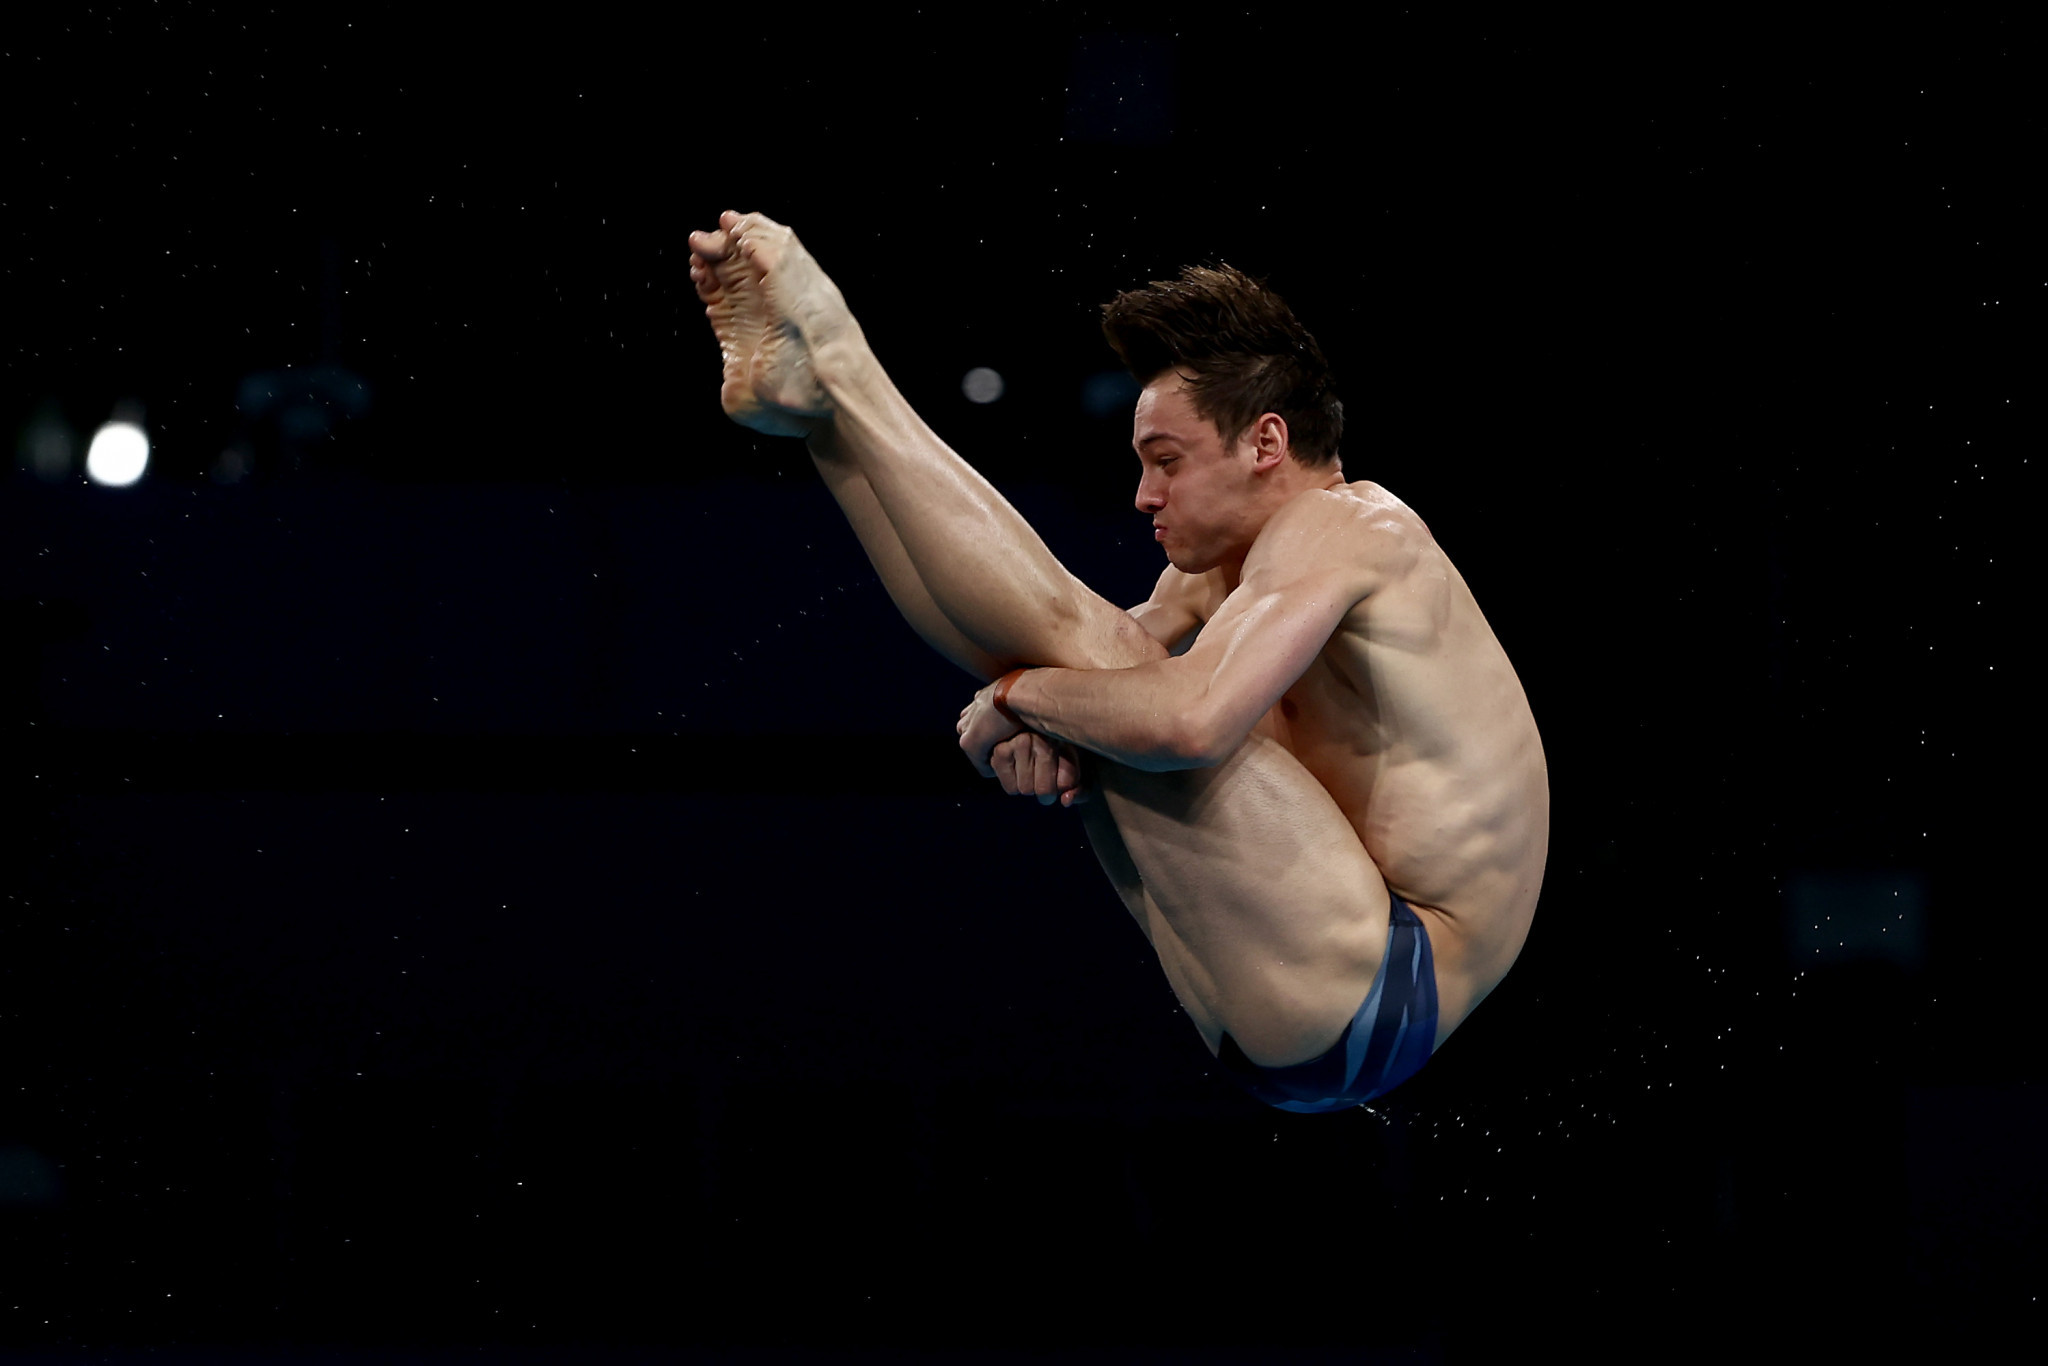 Britain's Olympic diving gold medallist Tom Daley said he was "furious" at FINA's restrictions on transgender women competing in its events ©Getty Images